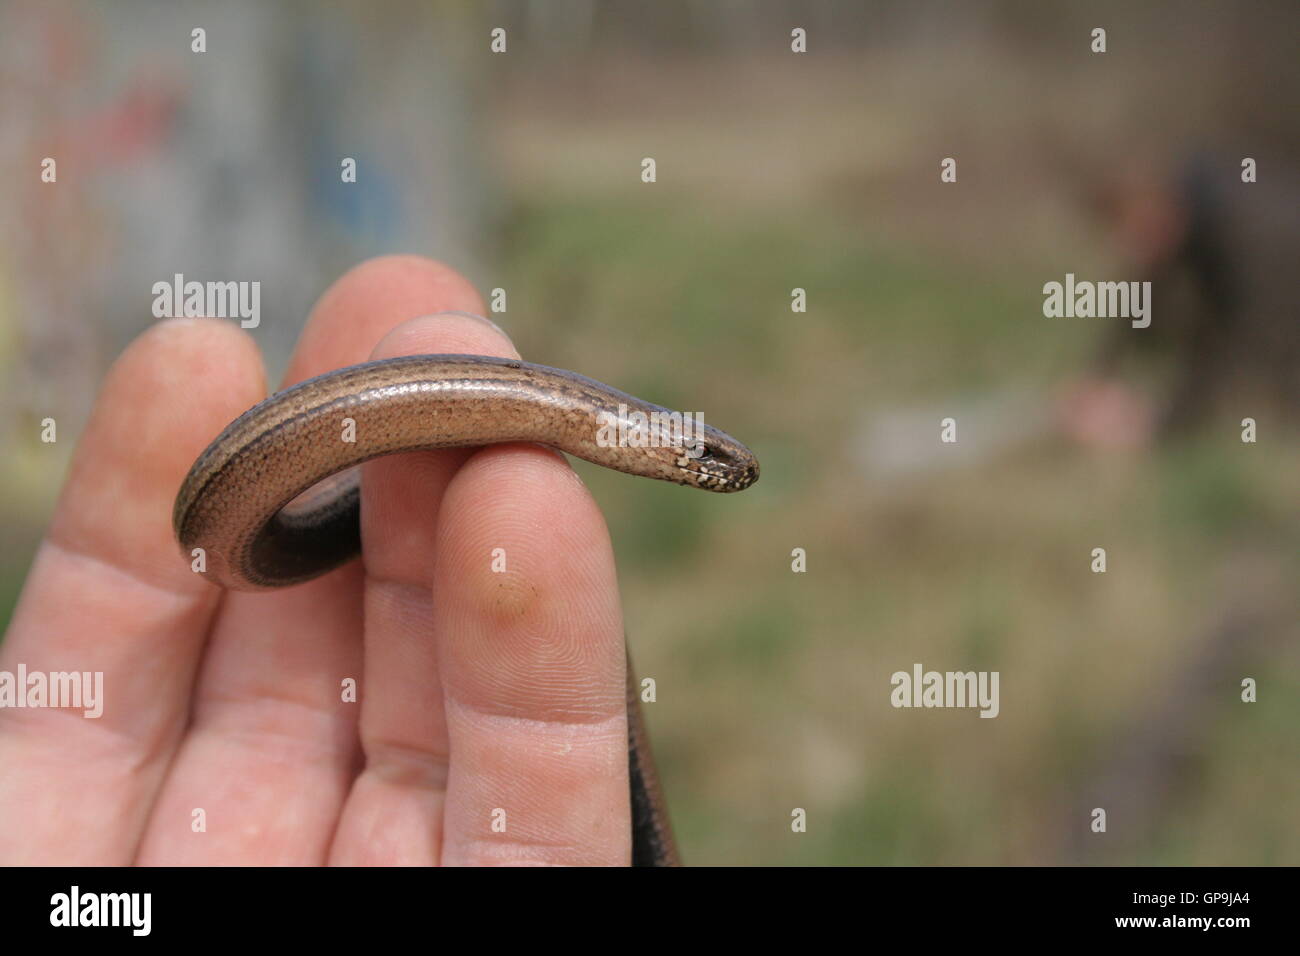 The Anguis fragilis, or slow worm, is a limbless lizard native to Eurasia. It is sometimes called a blindworm. Stock Photo